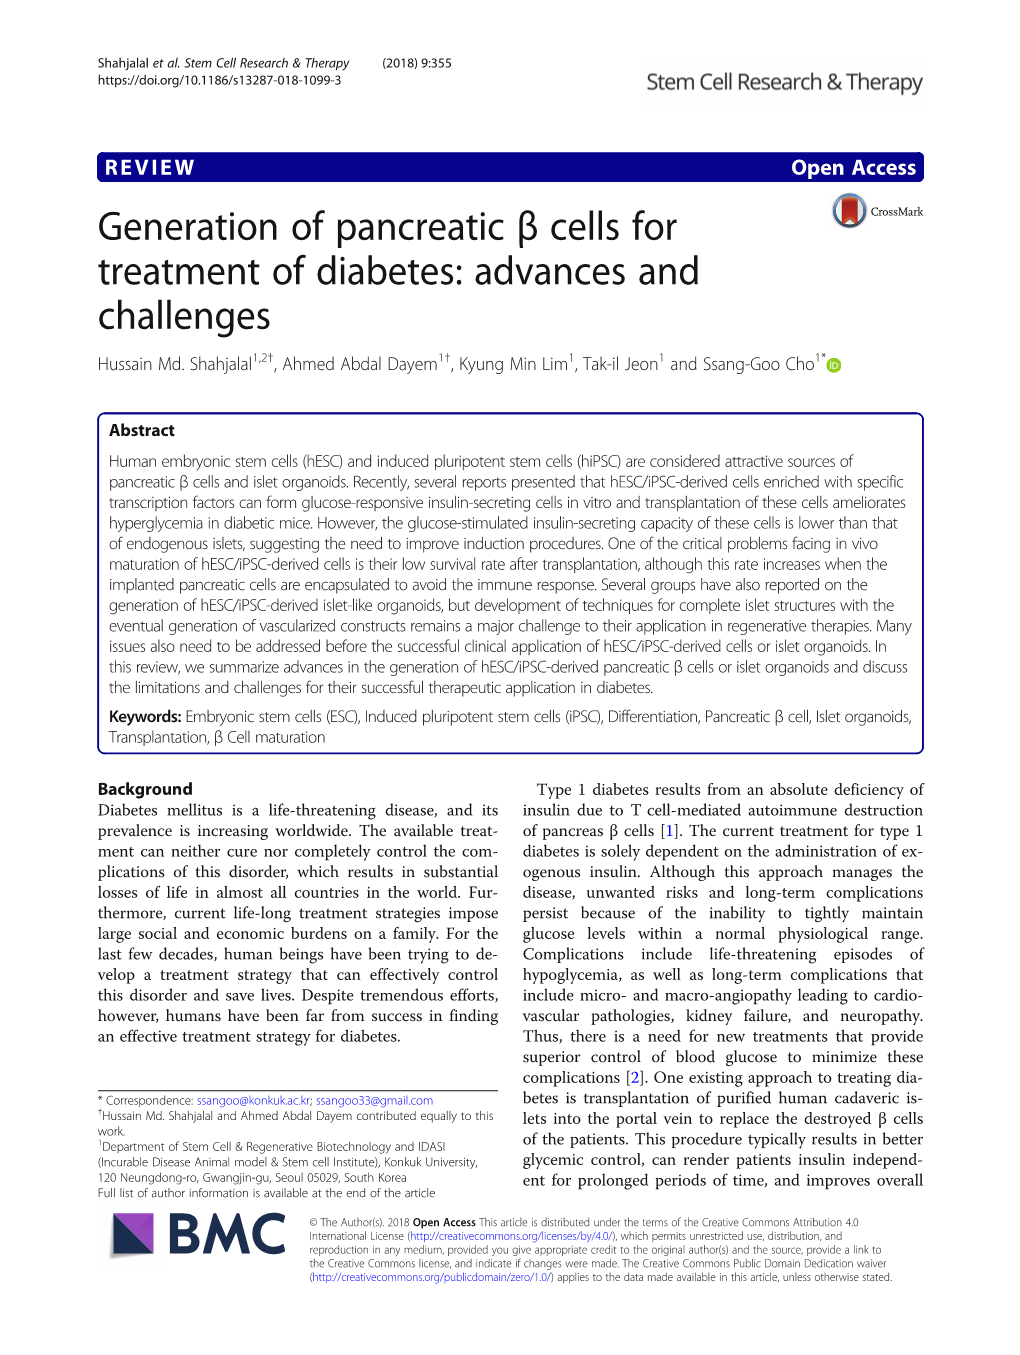 Generation of Pancreatic Β Cells for Treatment of Diabetes: Advances and Challenges Hussain Md